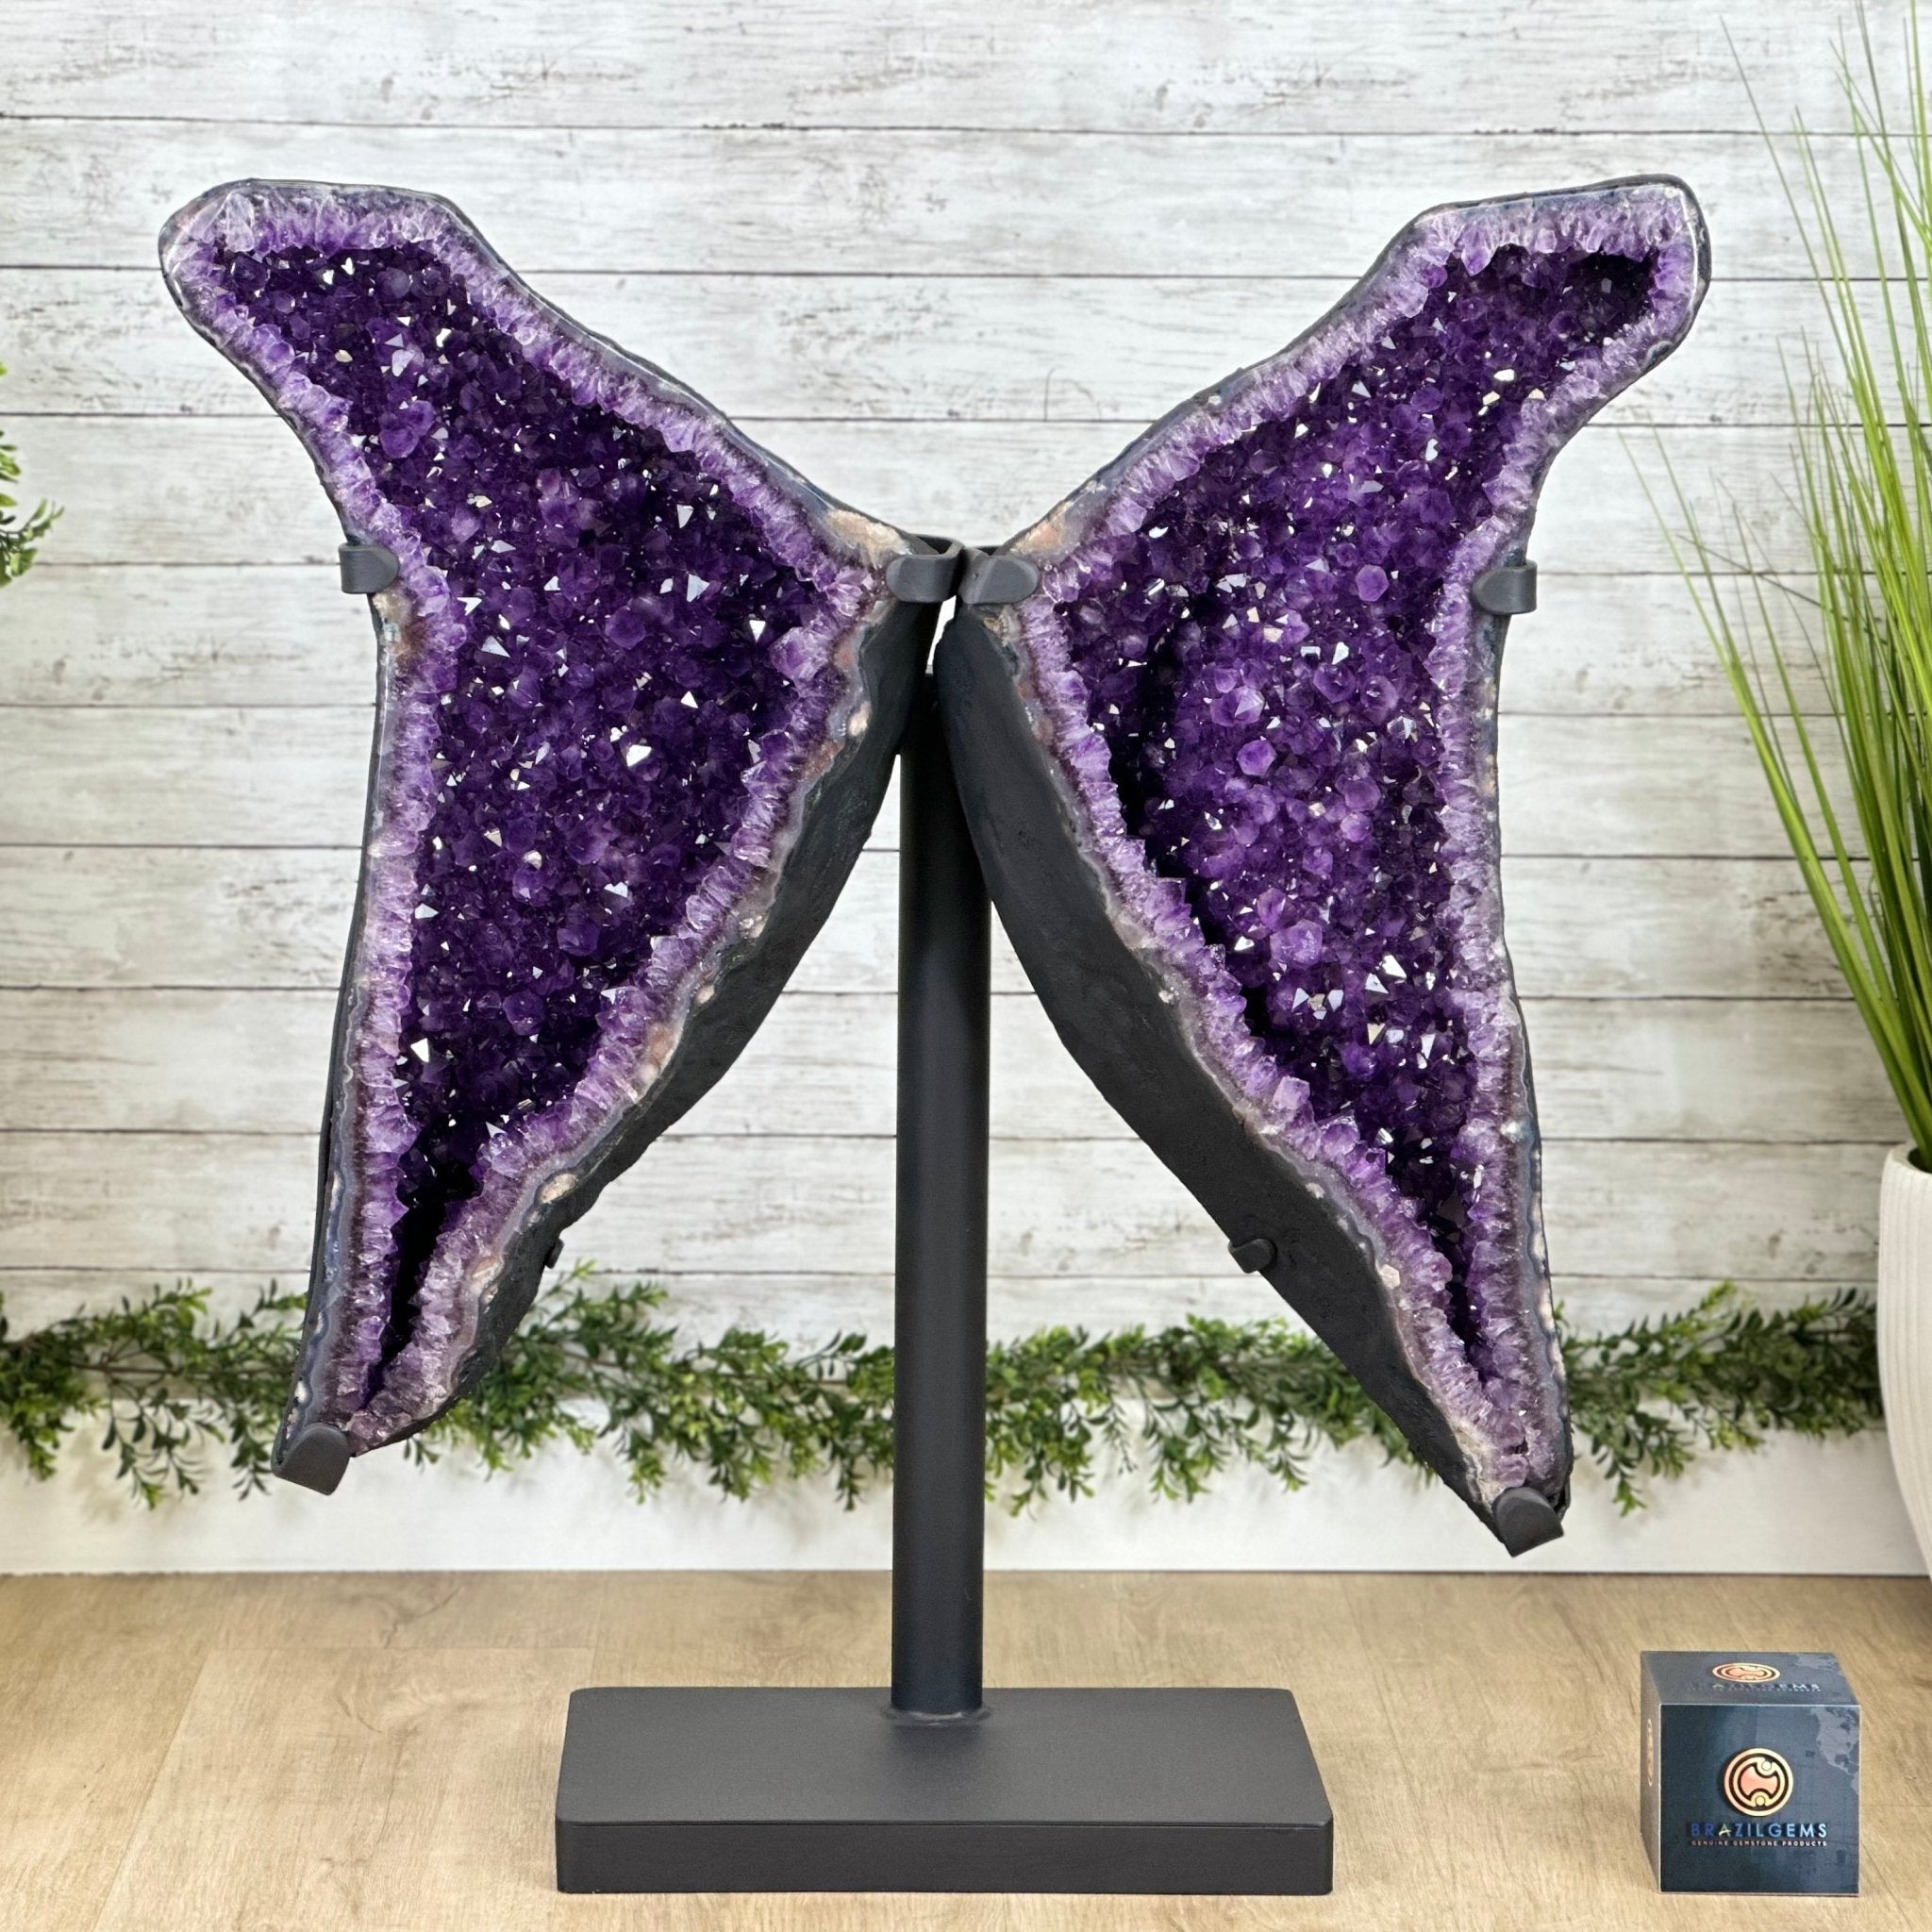 Large Super Quality Amethyst Butterfly Wings, 127.9 lbs & 35" Tall #5493-0047 - Brazil GemsBrazil GemsLarge Super Quality Amethyst Butterfly Wings, 127.9 lbs & 35" Tall #5493-0047Amethyst Butterfly Wings5493-0047